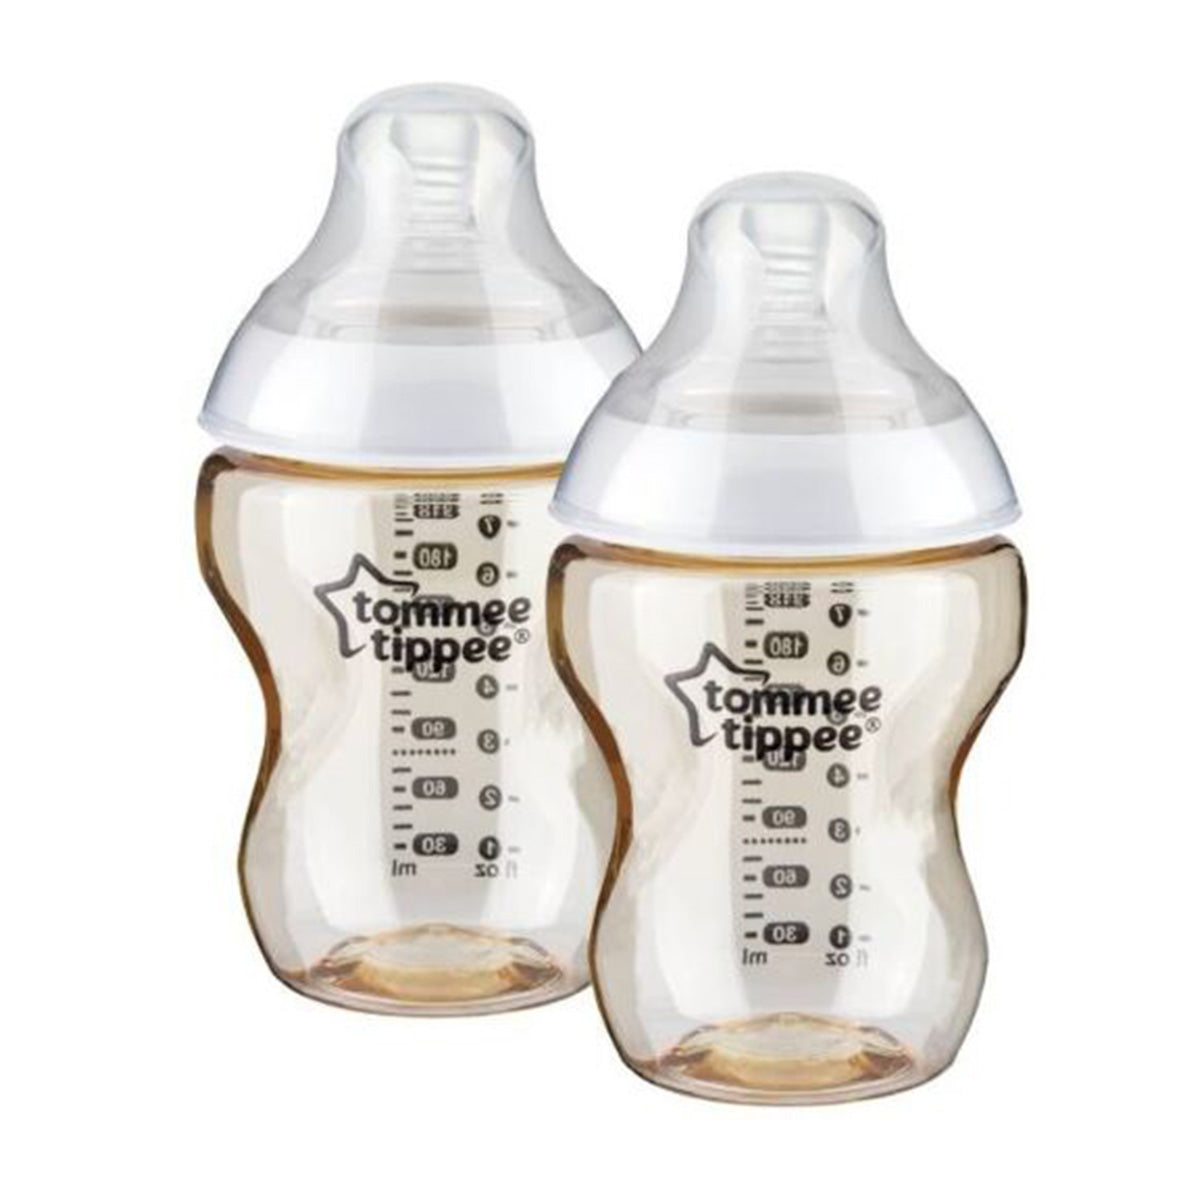 Tommee tippee - Close to Nature Feeding Bottle - 260ml - PETIT MIGNON